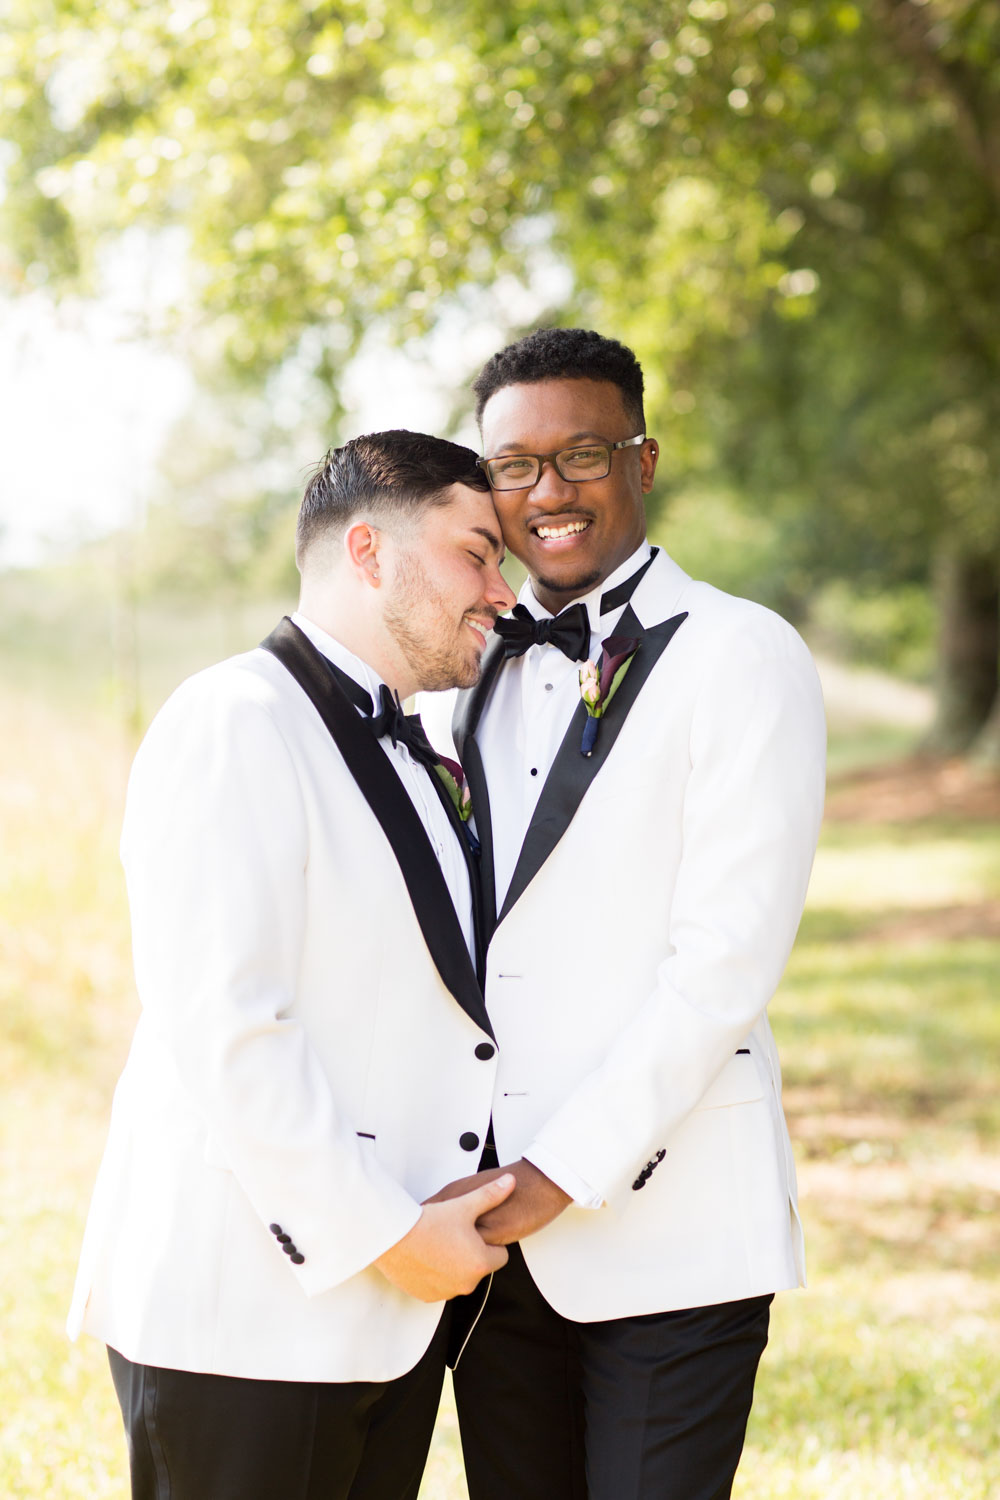 Tavion + Andrew: A Greenville, South Carolina, summer LGBTQ+ wedding with rose petal exit - Jessica Hunt Photography - published on Equally Wed, the leading LGBTQ+ wedding magazine - two grooms